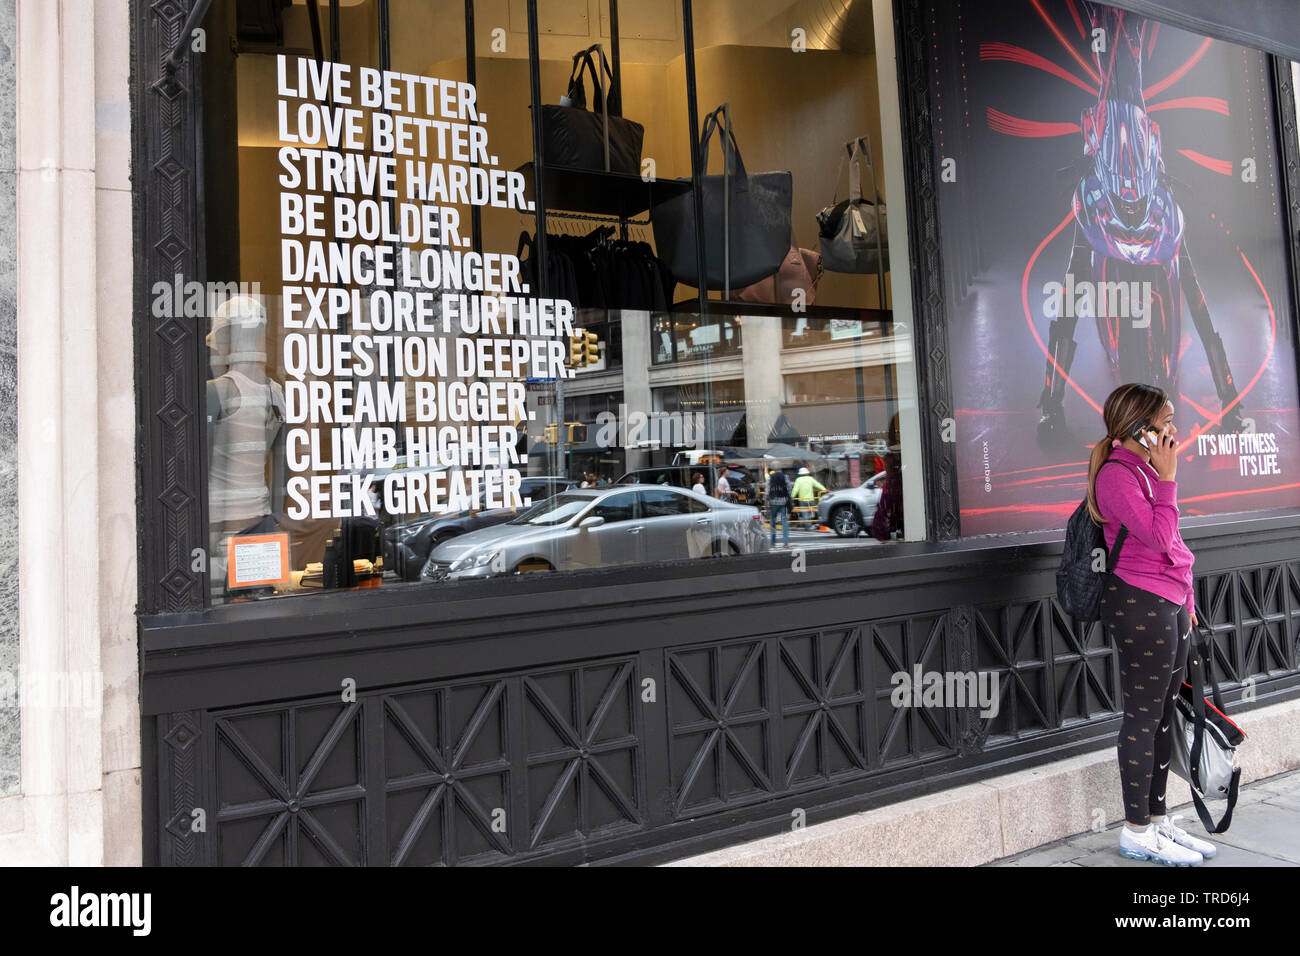 A woman on the phone outside an Equinox gym in Manhattan that has a most inspirational message in its window. Stock Photo